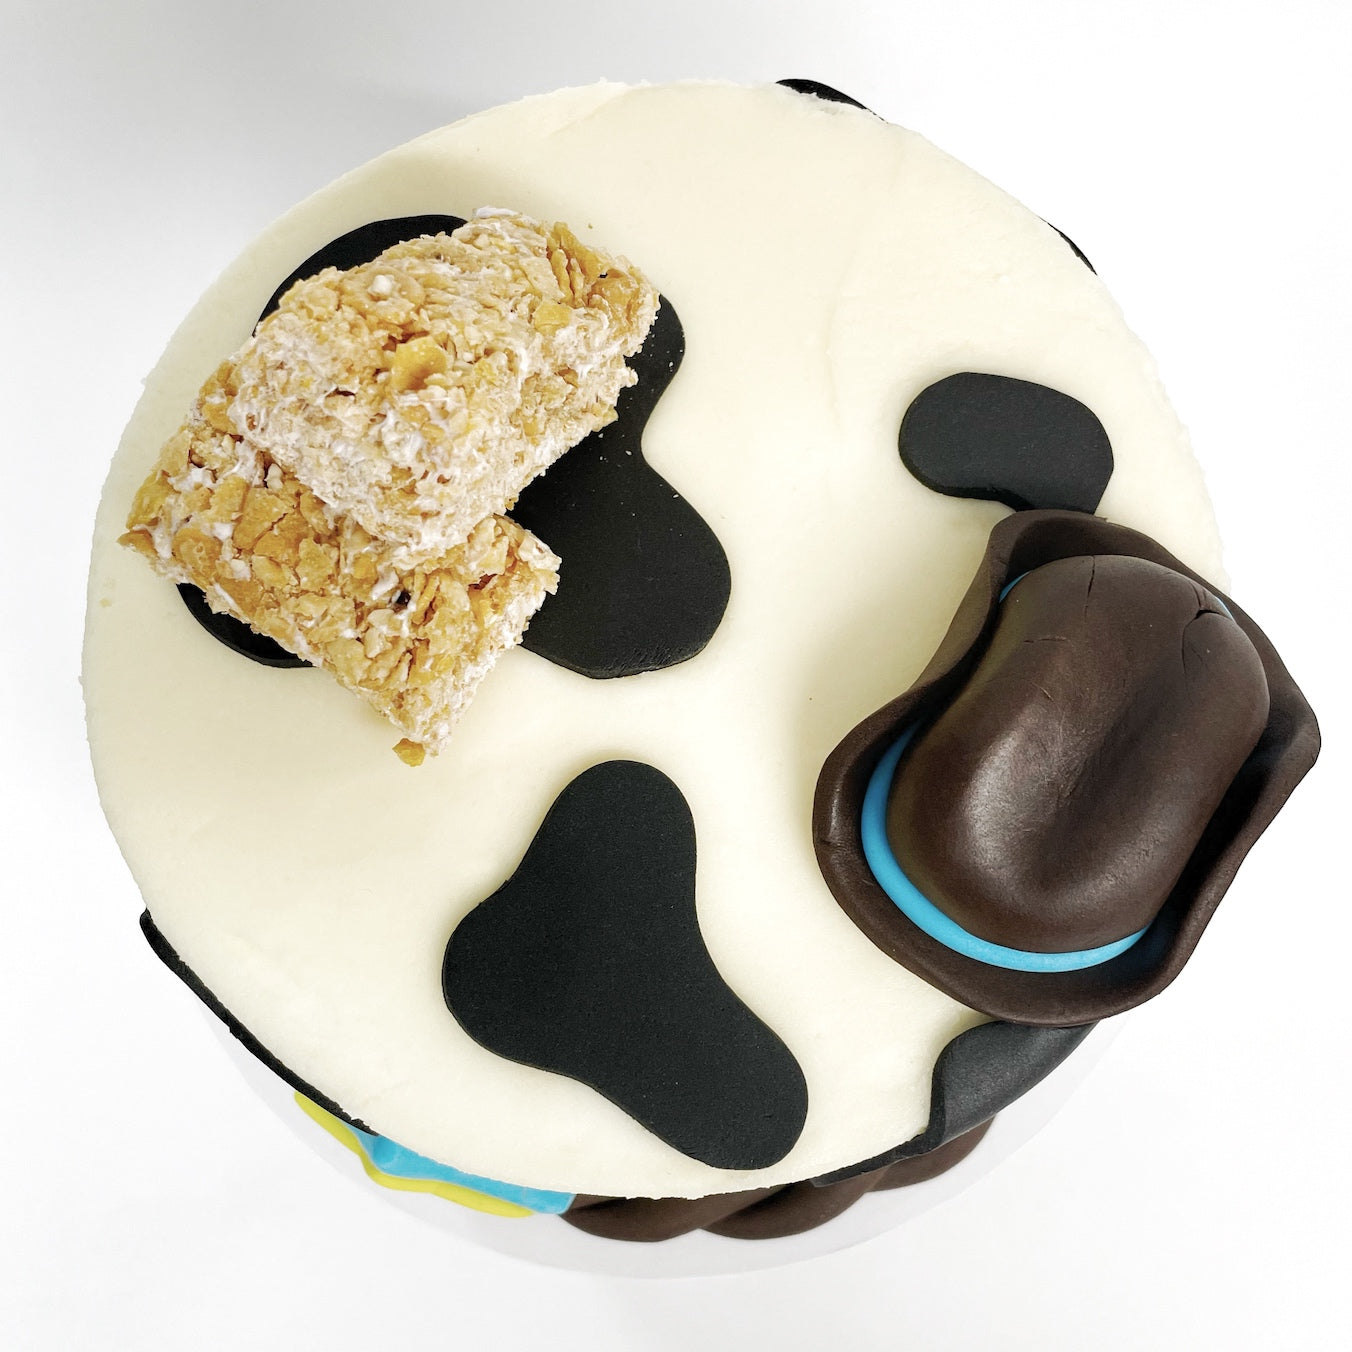 DIY Cowboy Cowgirl Cake Kit, Rodeo Cake, My First Rodeo Party, Boy's Birthday